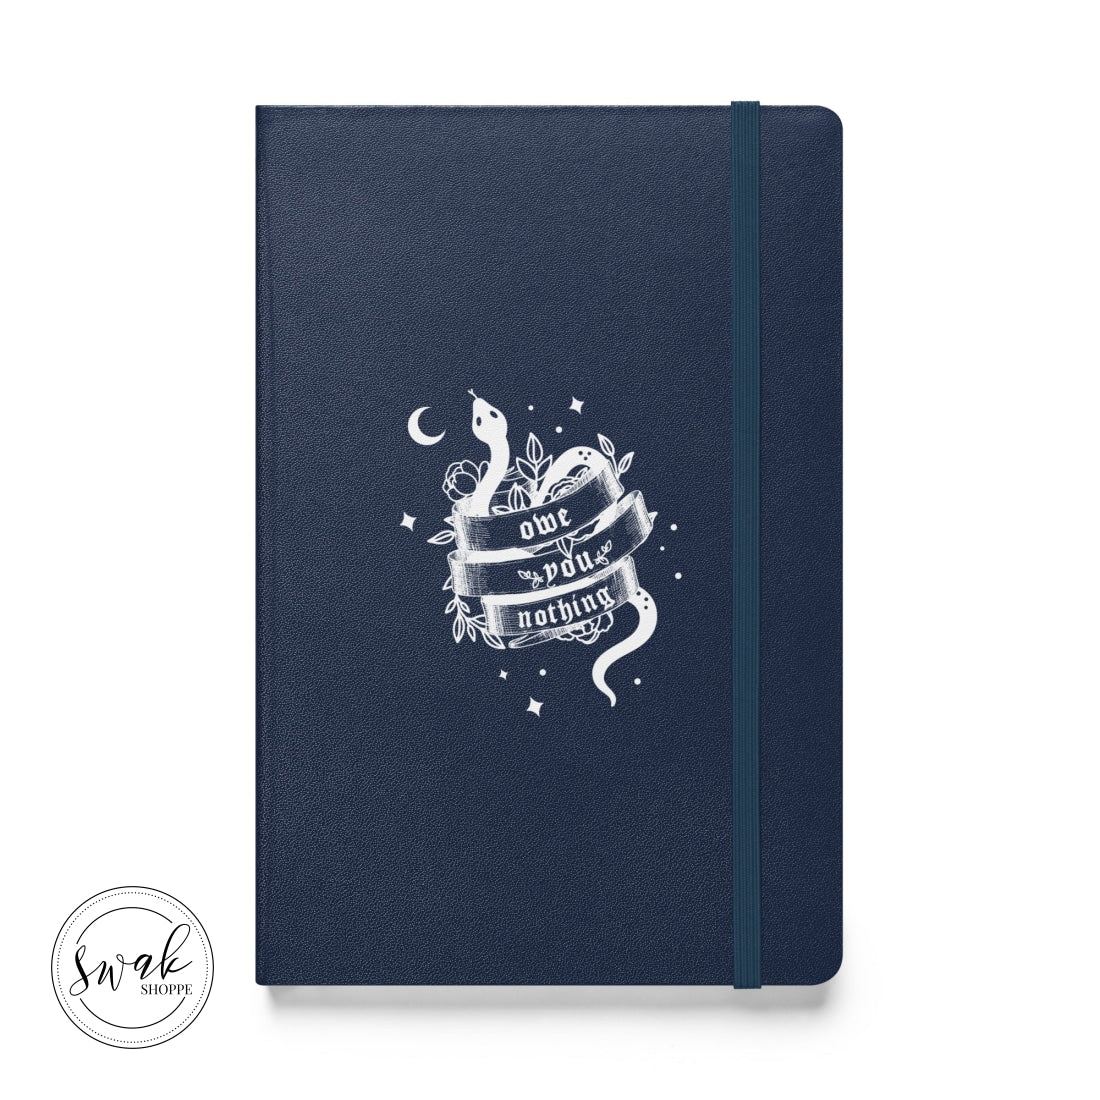 Owe You Nothing Did Something Bad Hardcover Bound Notebook Navy